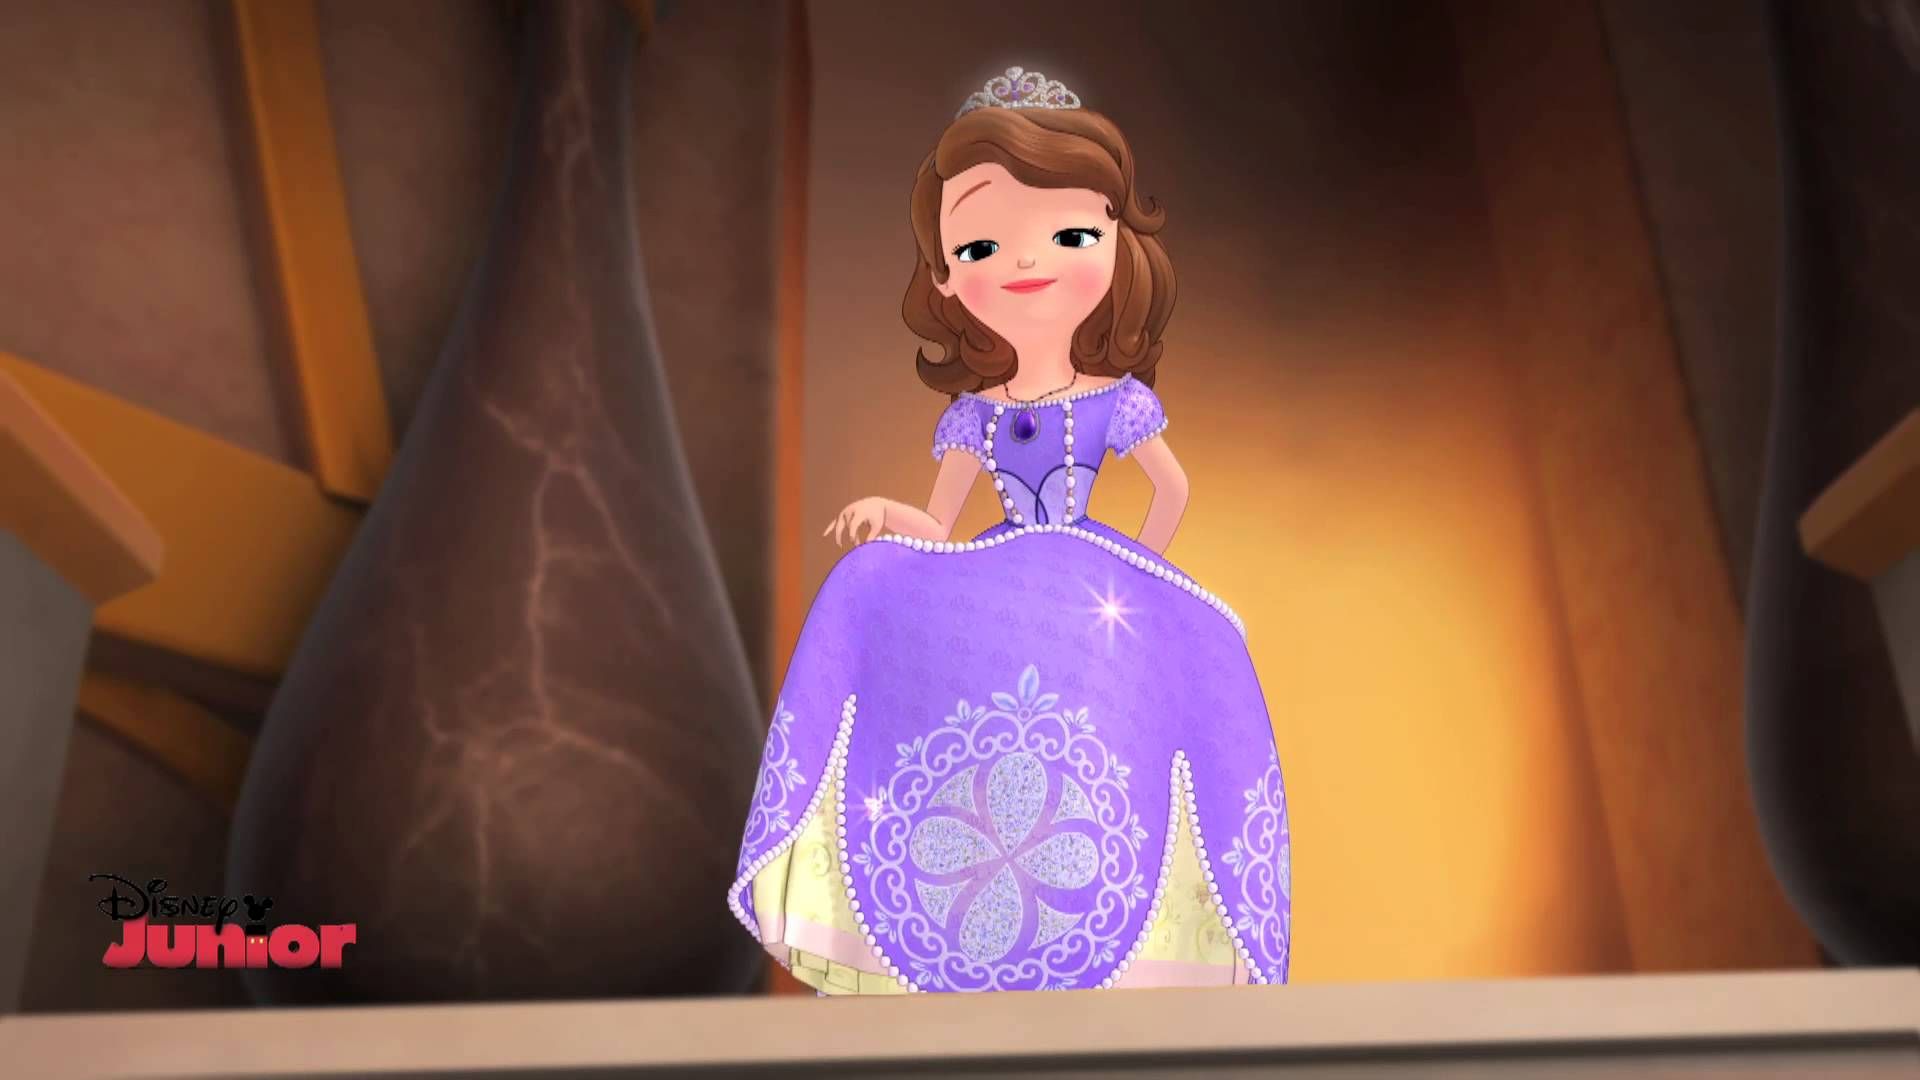 Sofia The First Opening Titles - HD Wallpaper 